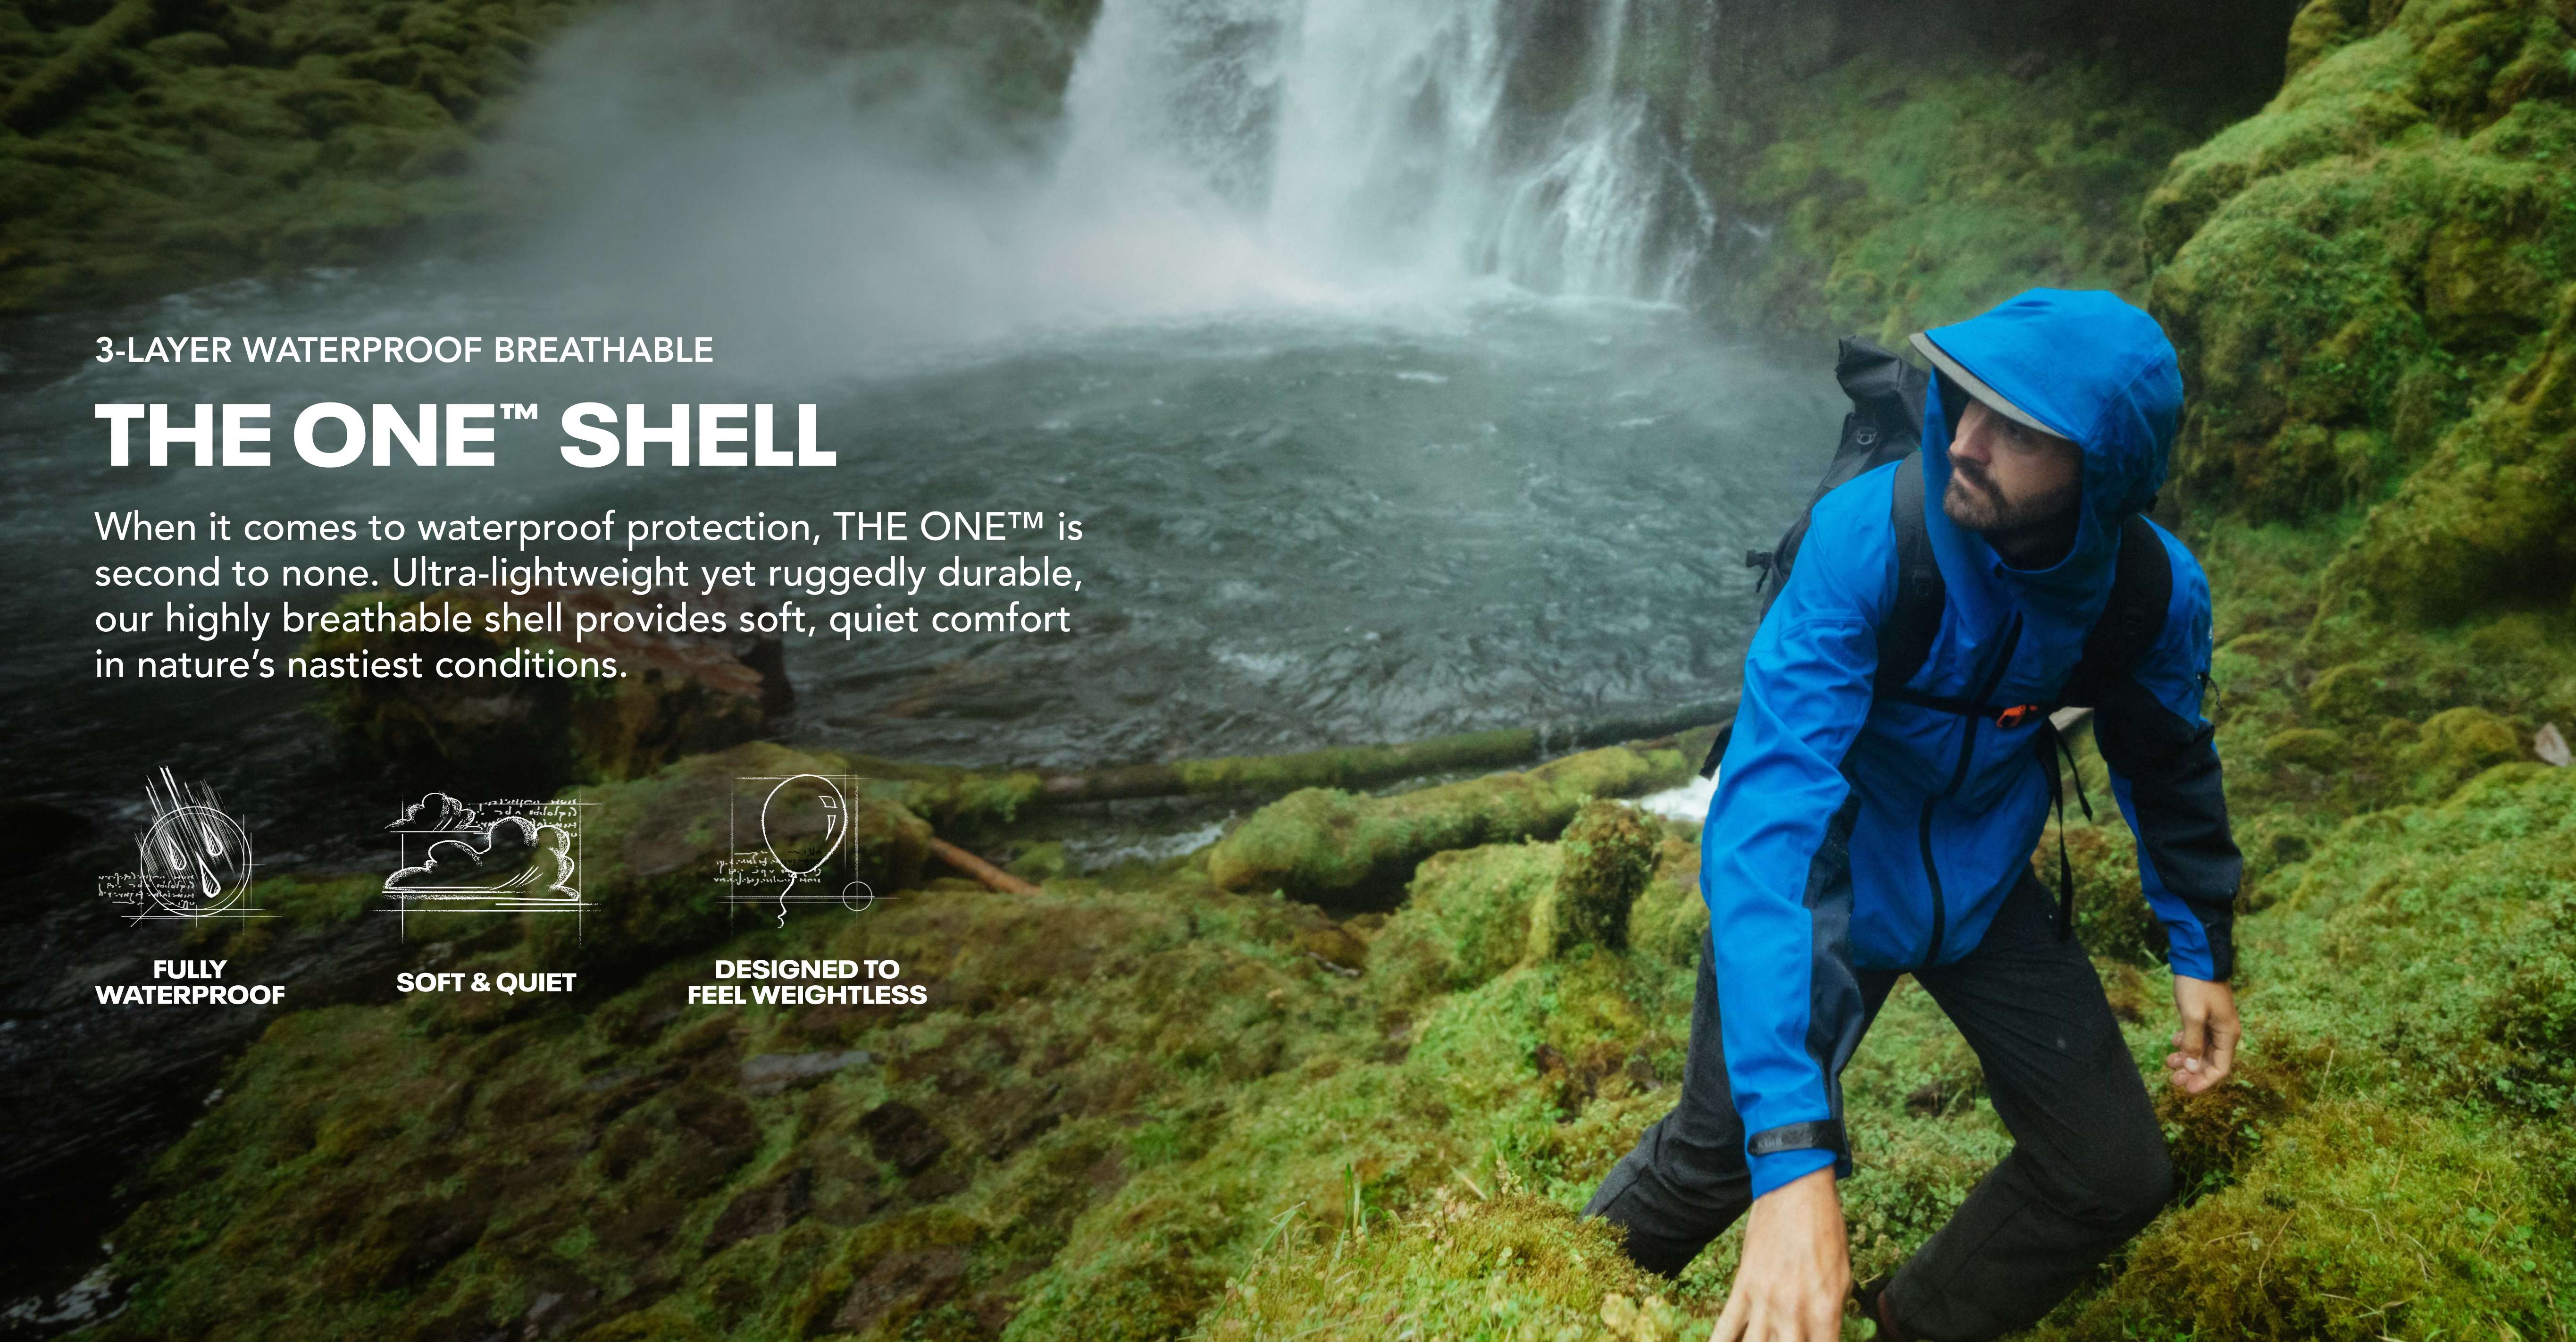 KÜHL Women's Hiking Clothing, Performance and Outdoor Wear